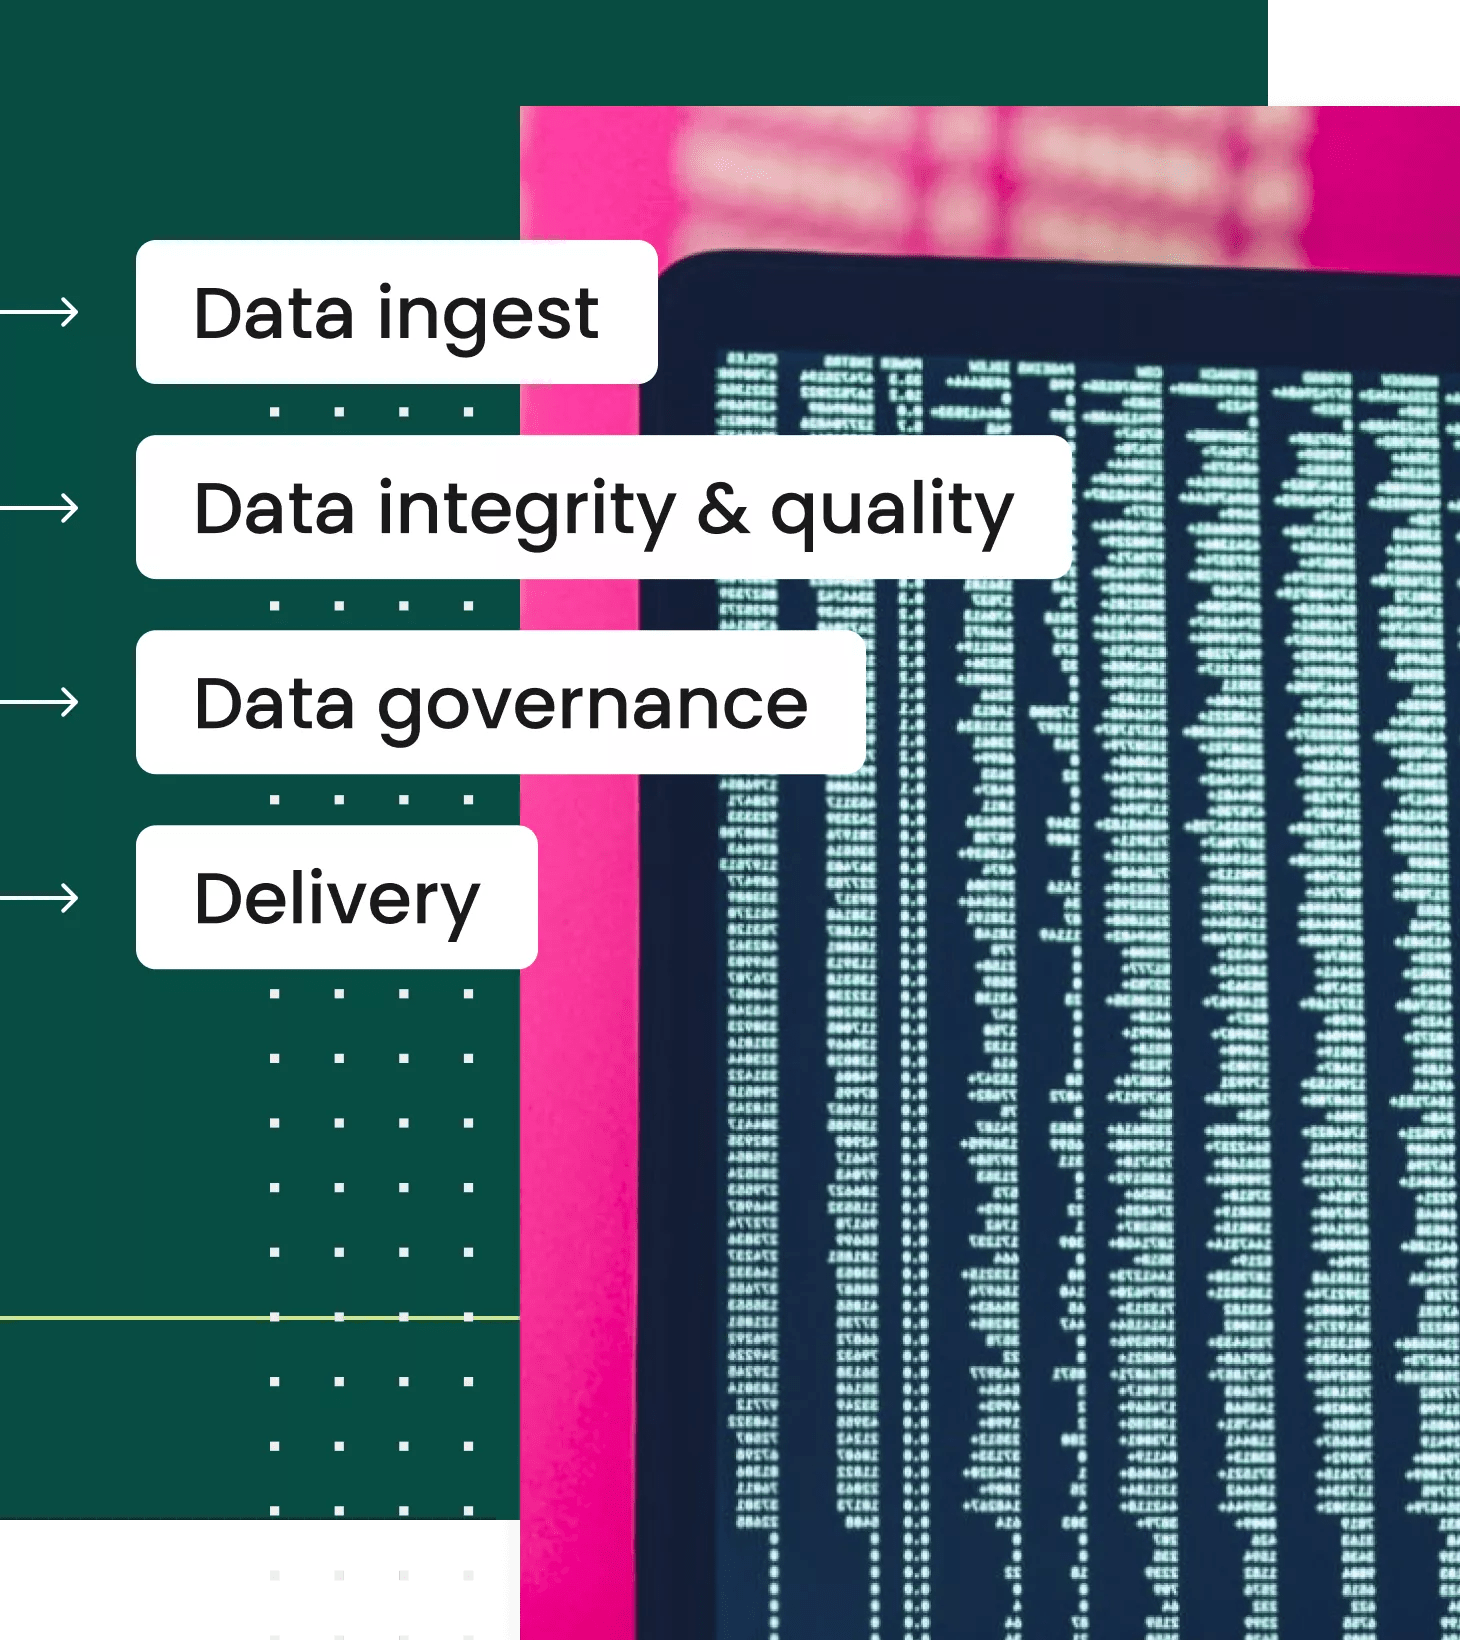 data ingest,data integrity & equality,data governance,delivery